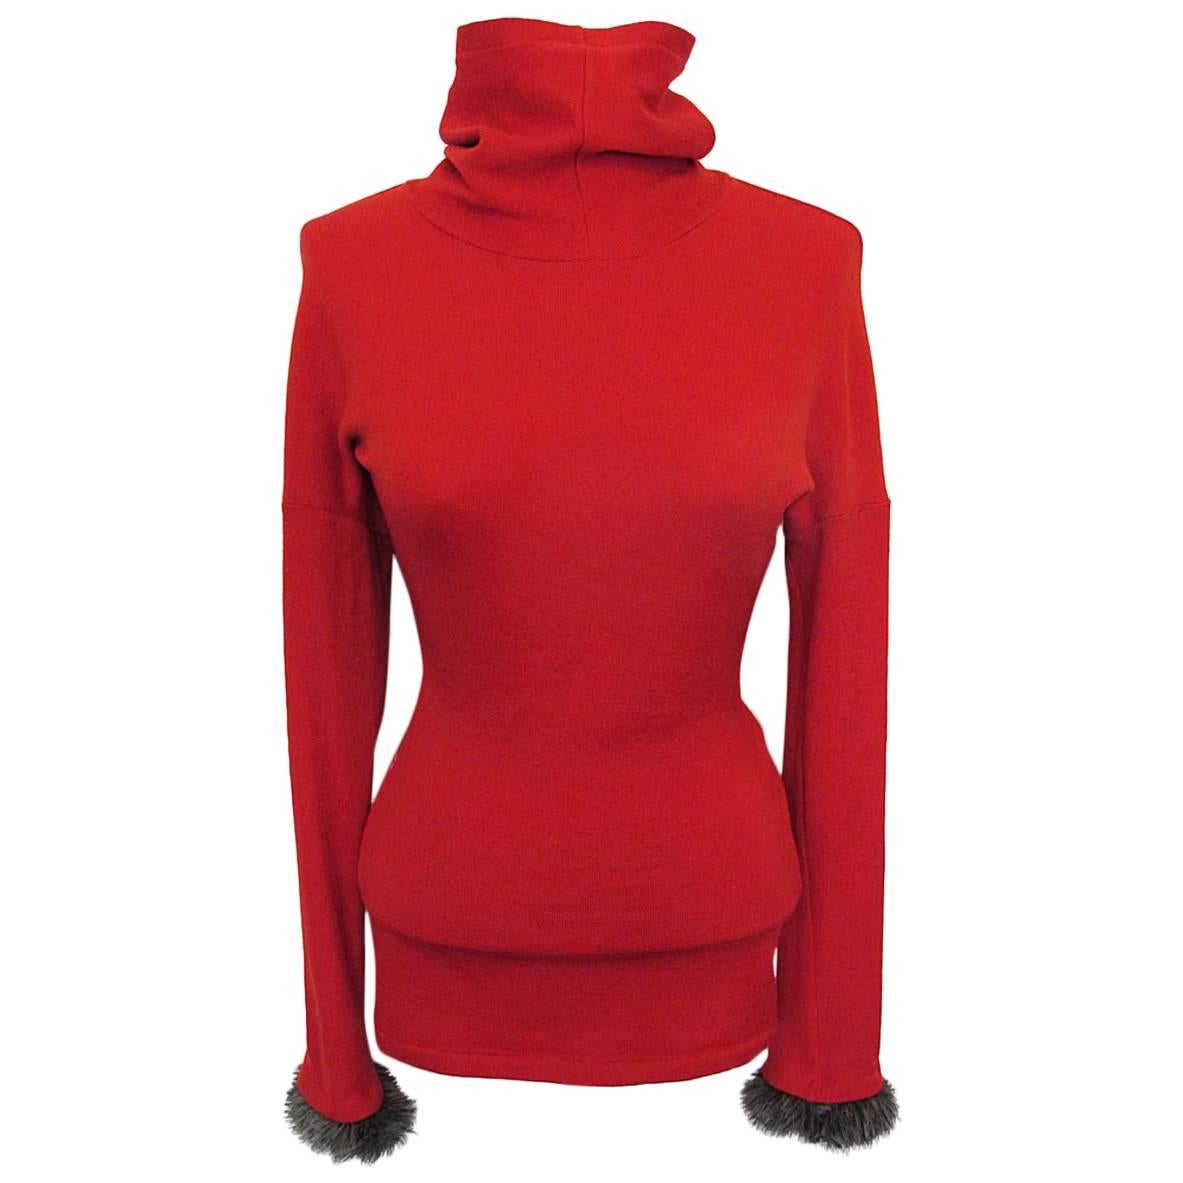 Yohji Yamamoto Hooded Red Sweater with Faux Fur Cuffs For Sale